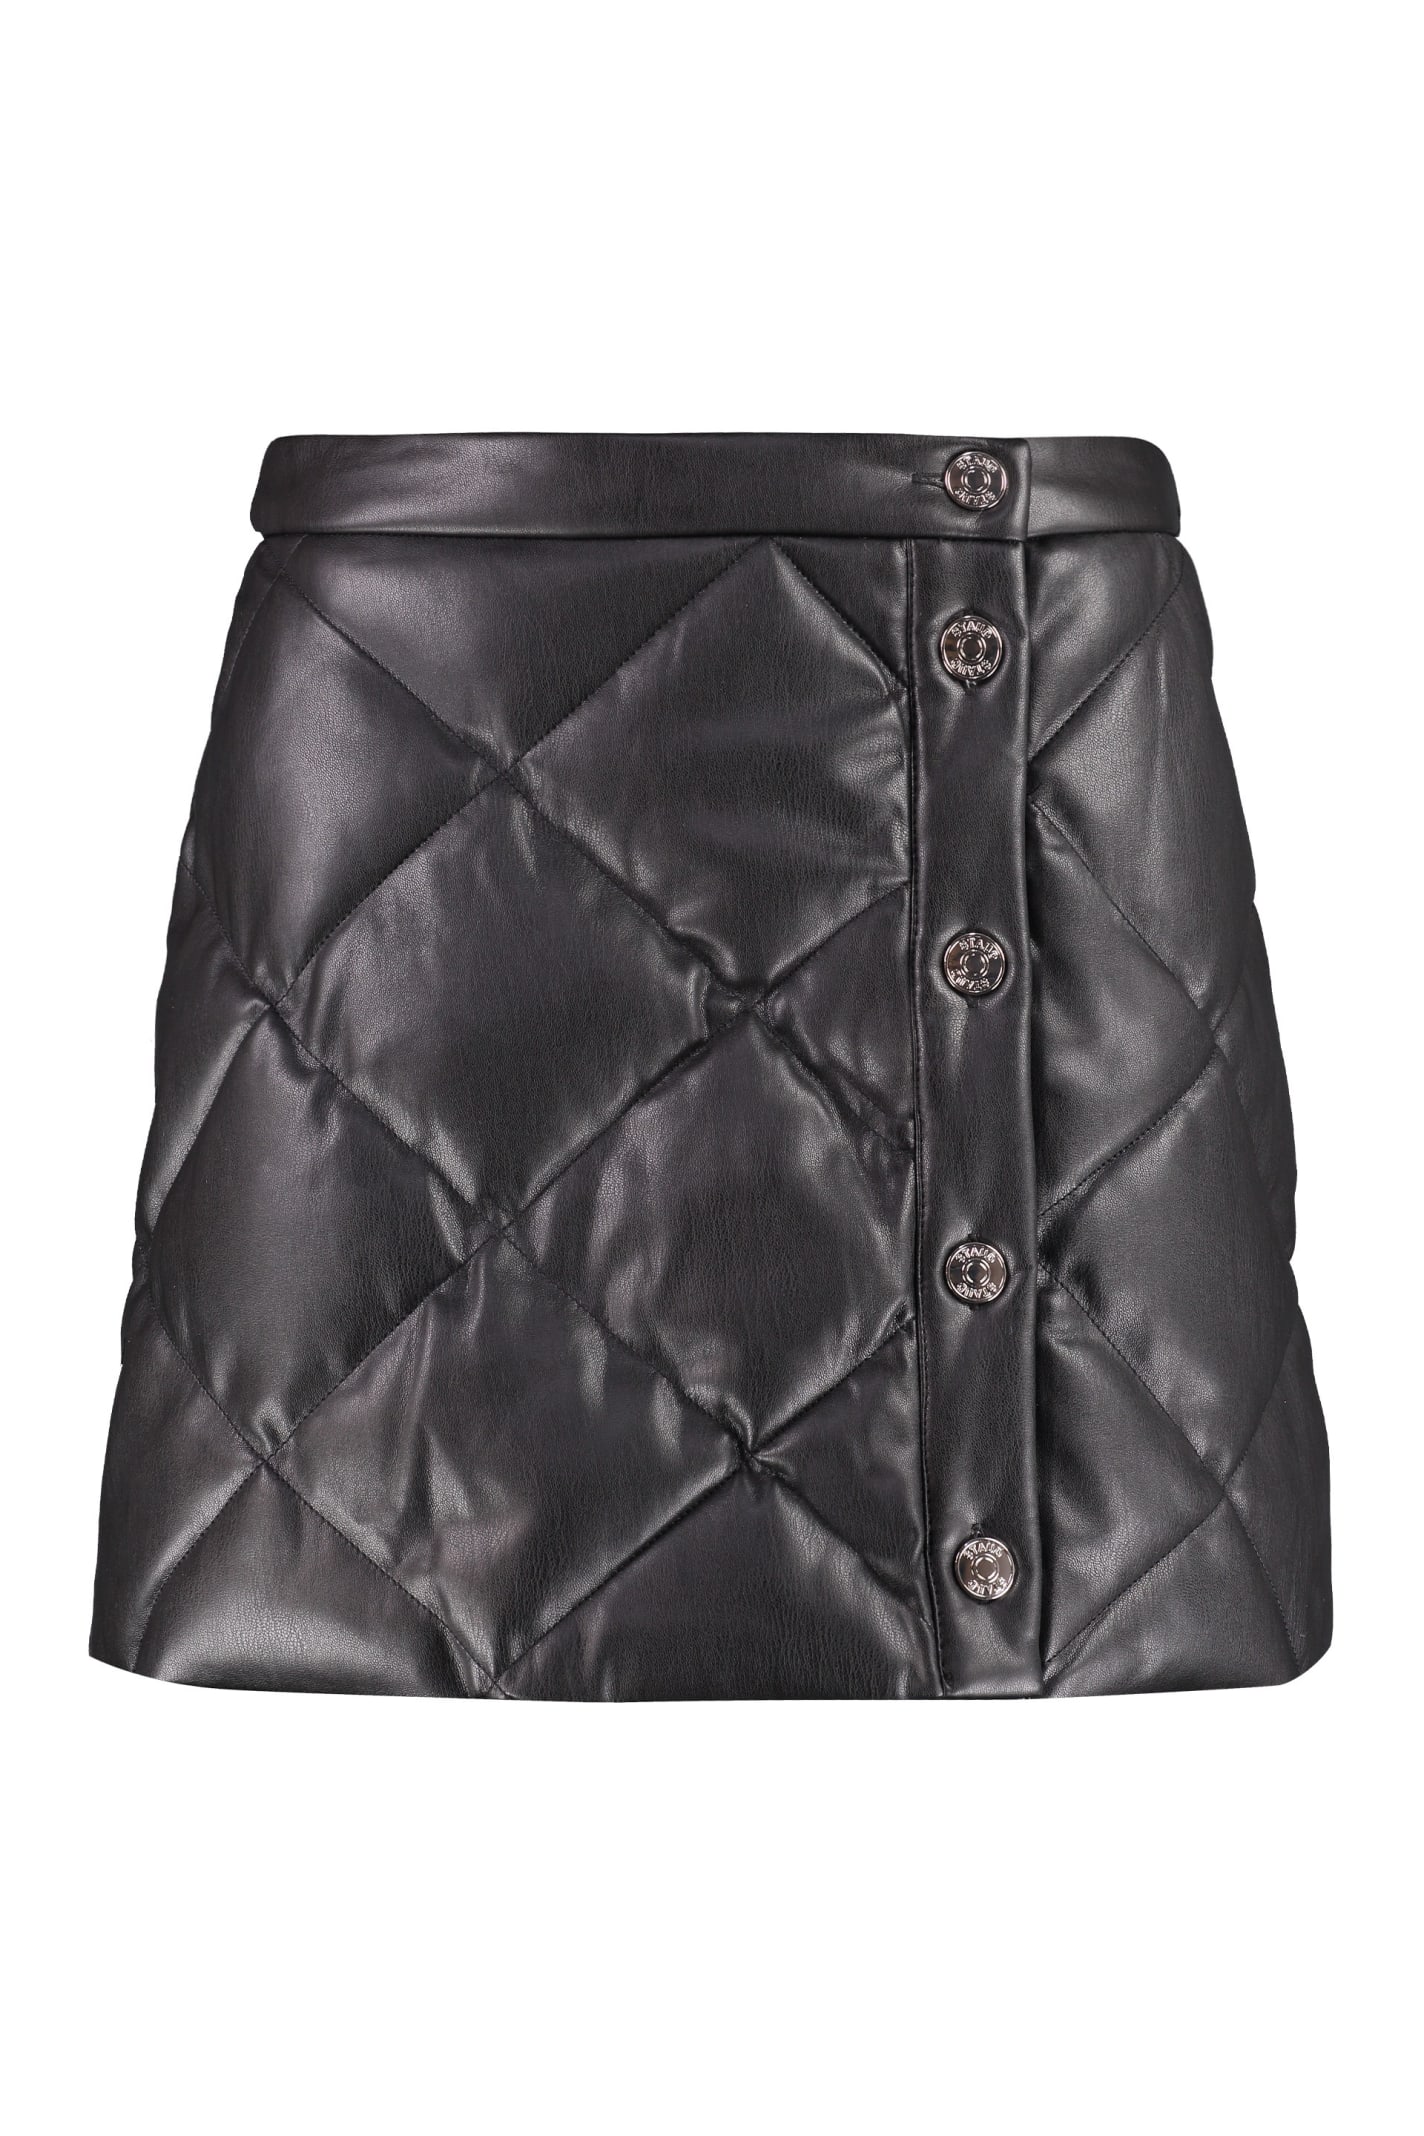 STAUD Dice Quilted Faux Leather Mini Skirt